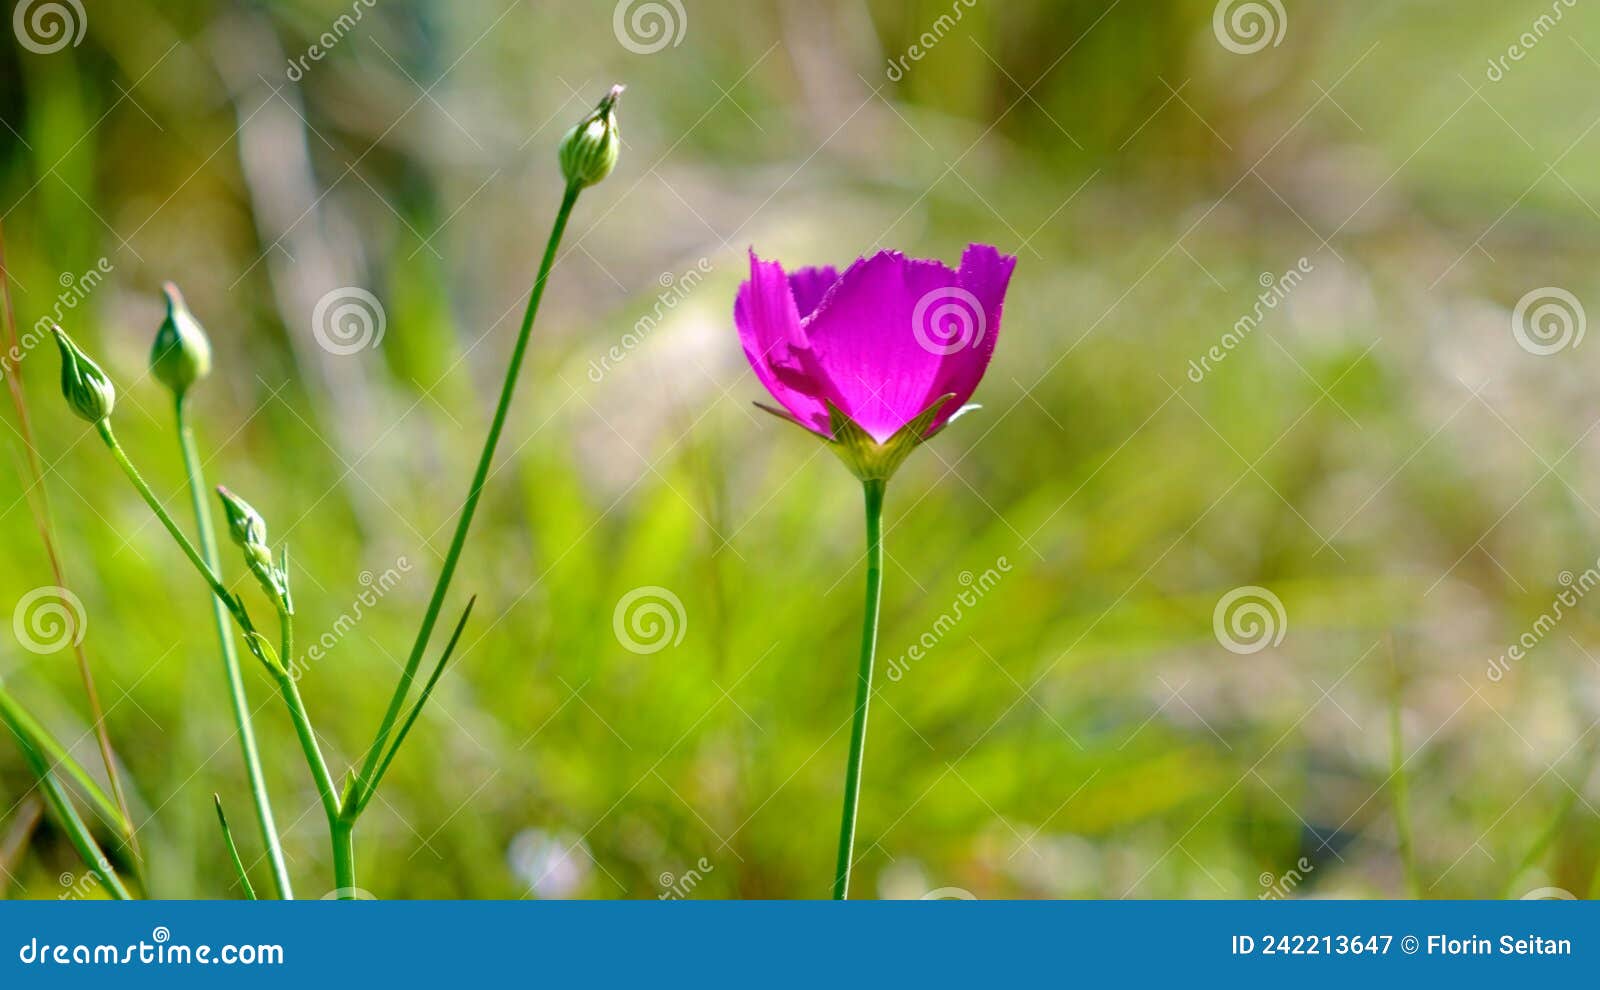 texas winecup flower callirhoe involucrata with new buds. shallow depth of field, with green grass in the background. purple wil